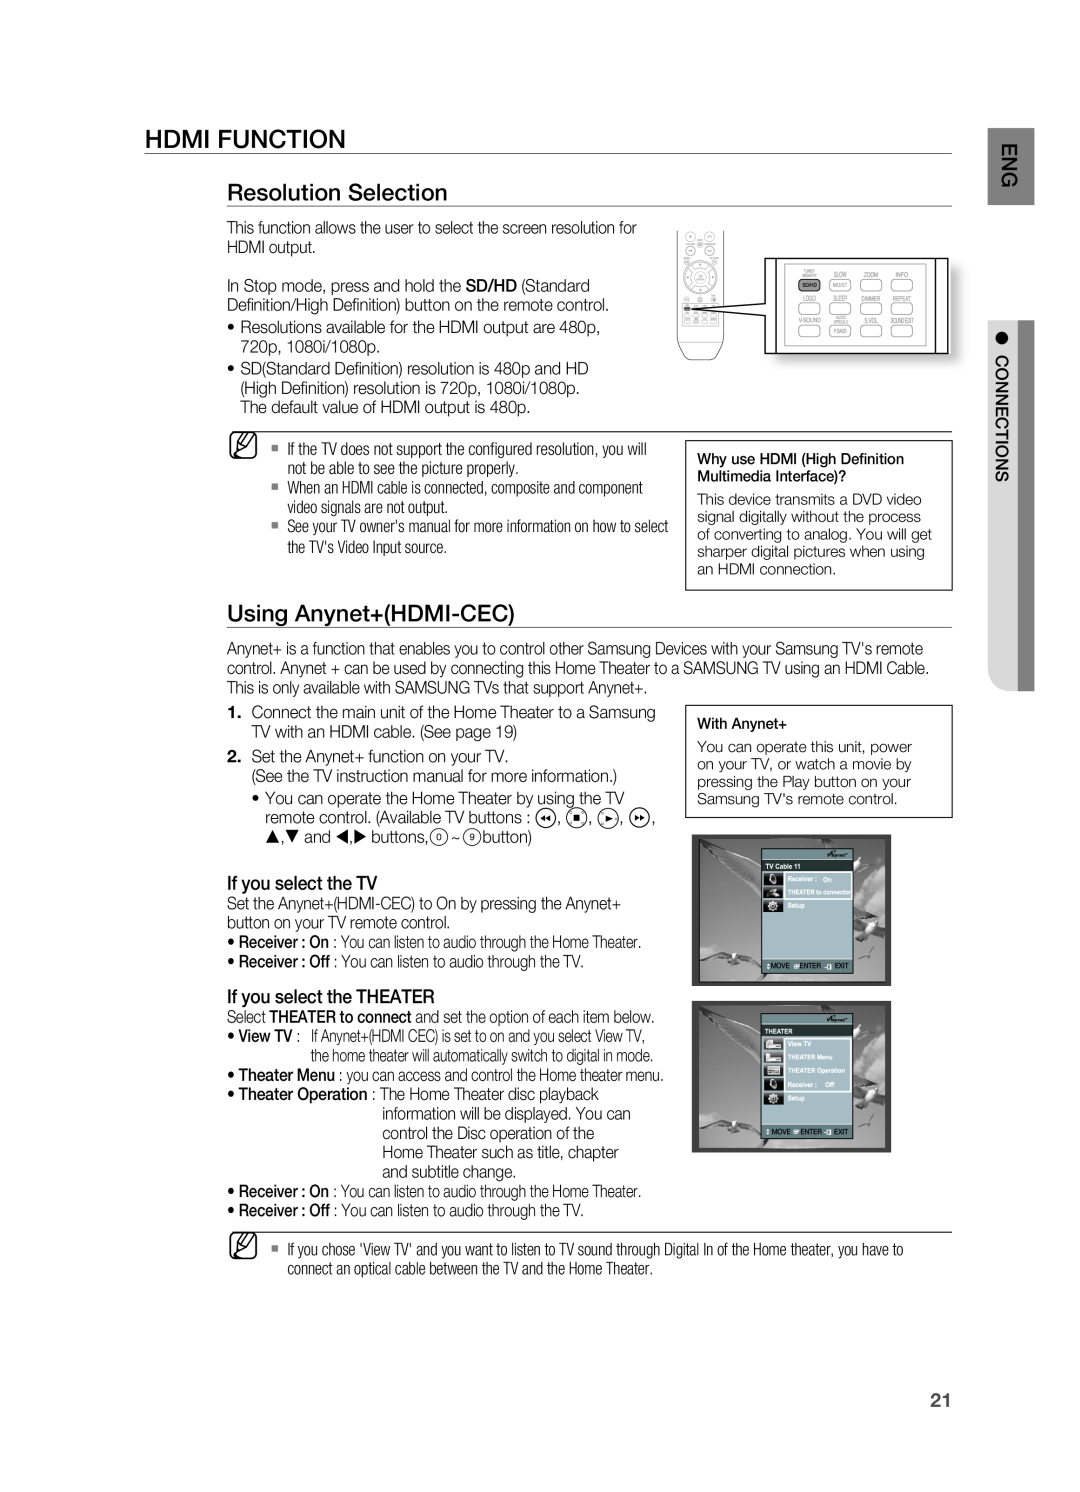 Sony HT-X810 user manual Hdmi Function, resolution Selection, Using Anynet+HDMI-CEC 